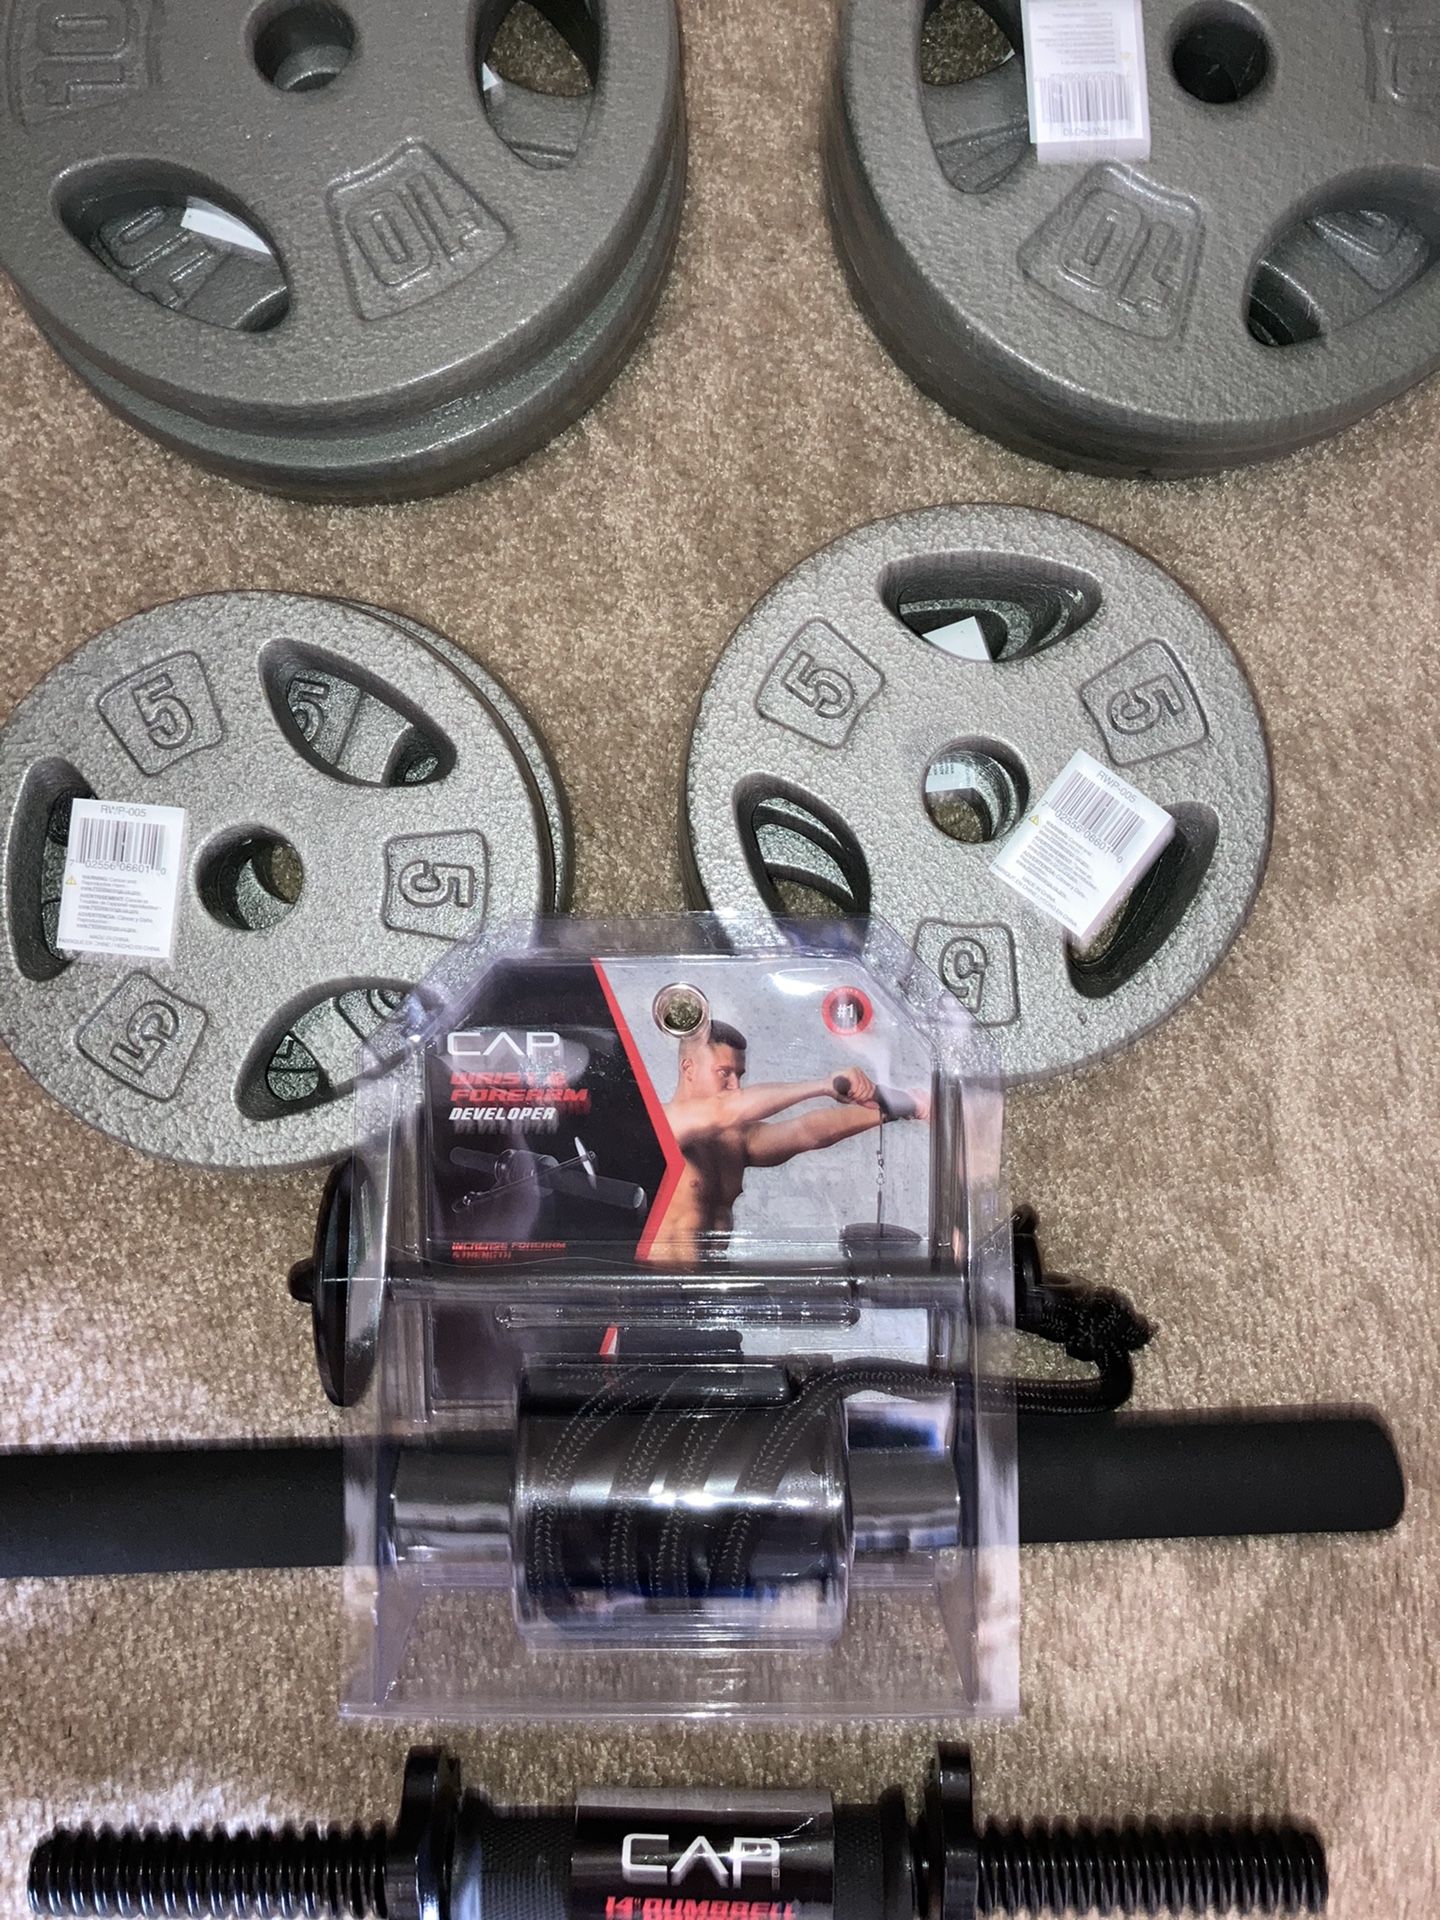 5 and 10 pound plates with Dumbbell handle and Wrist and forearm developer